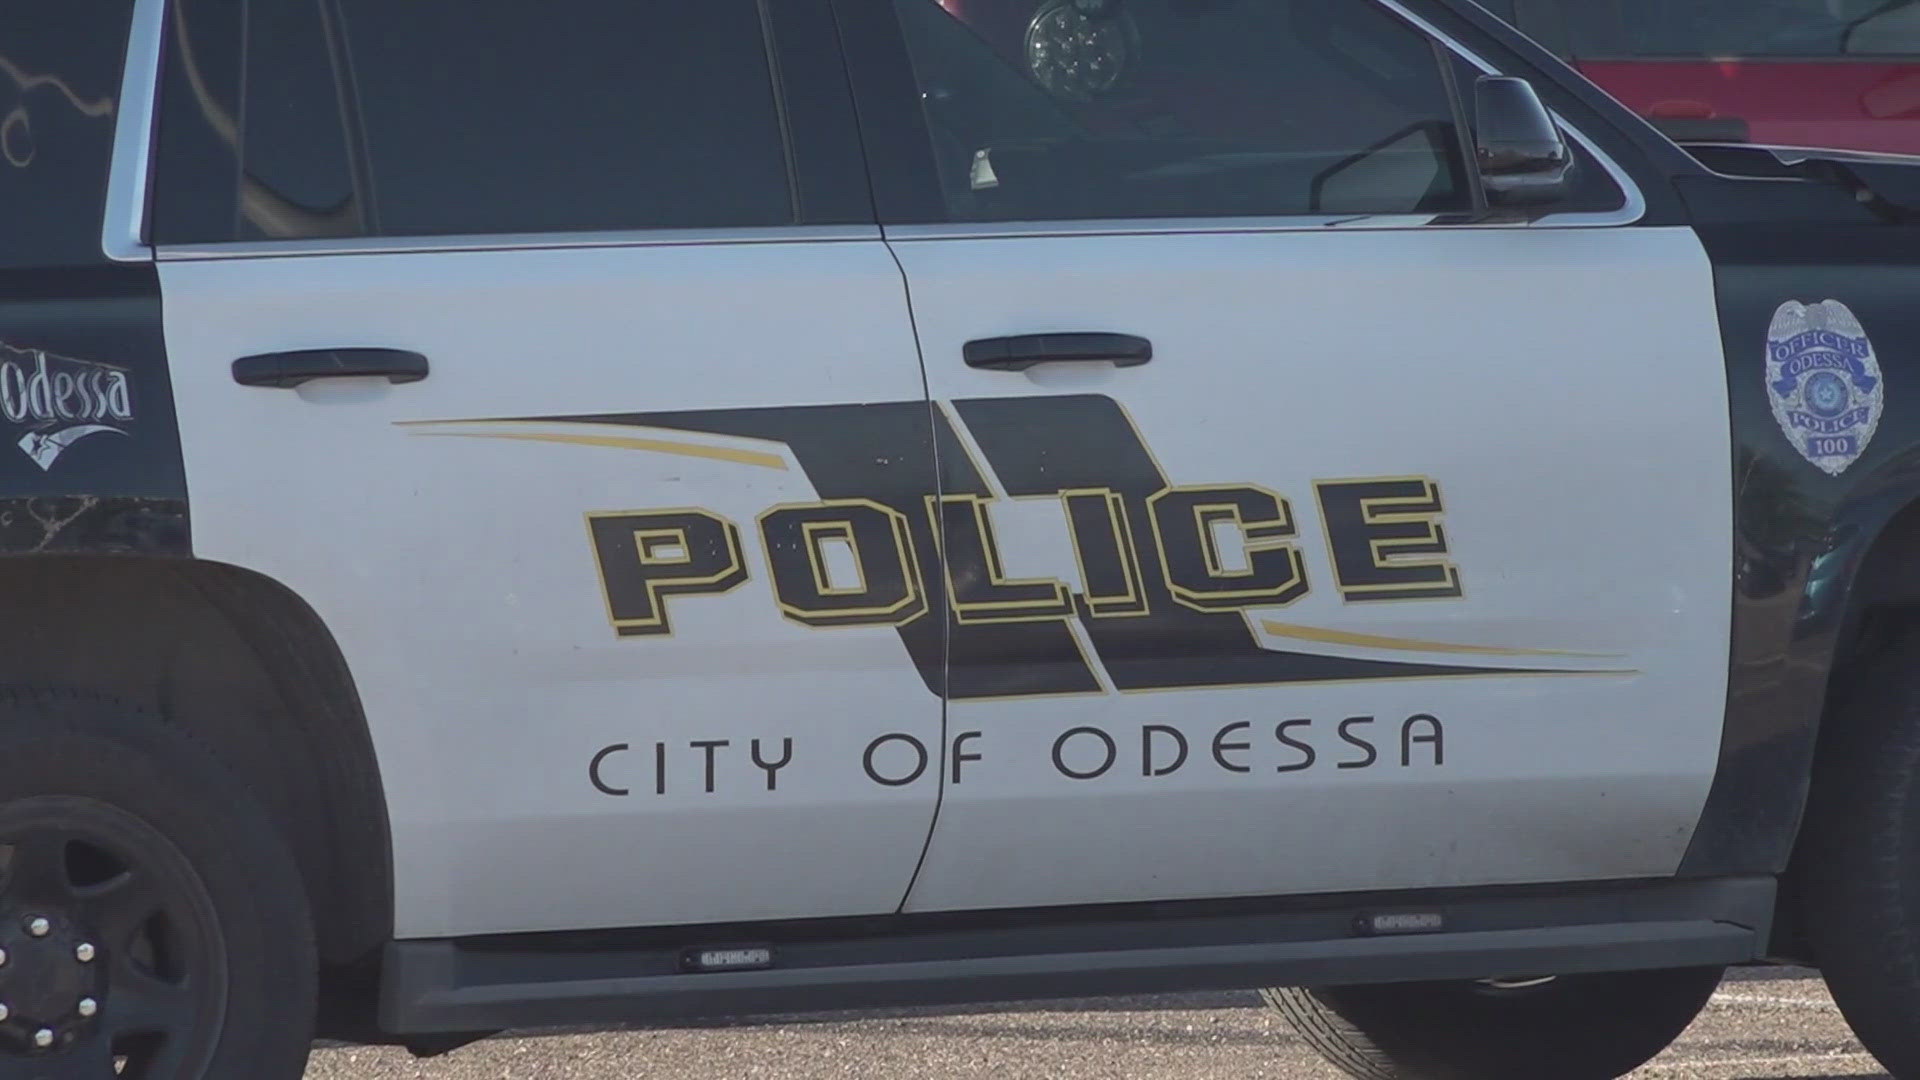 According to OPD, unsafe left turns cause the most crashes in Odessa, followed by speeding and driver inattention.